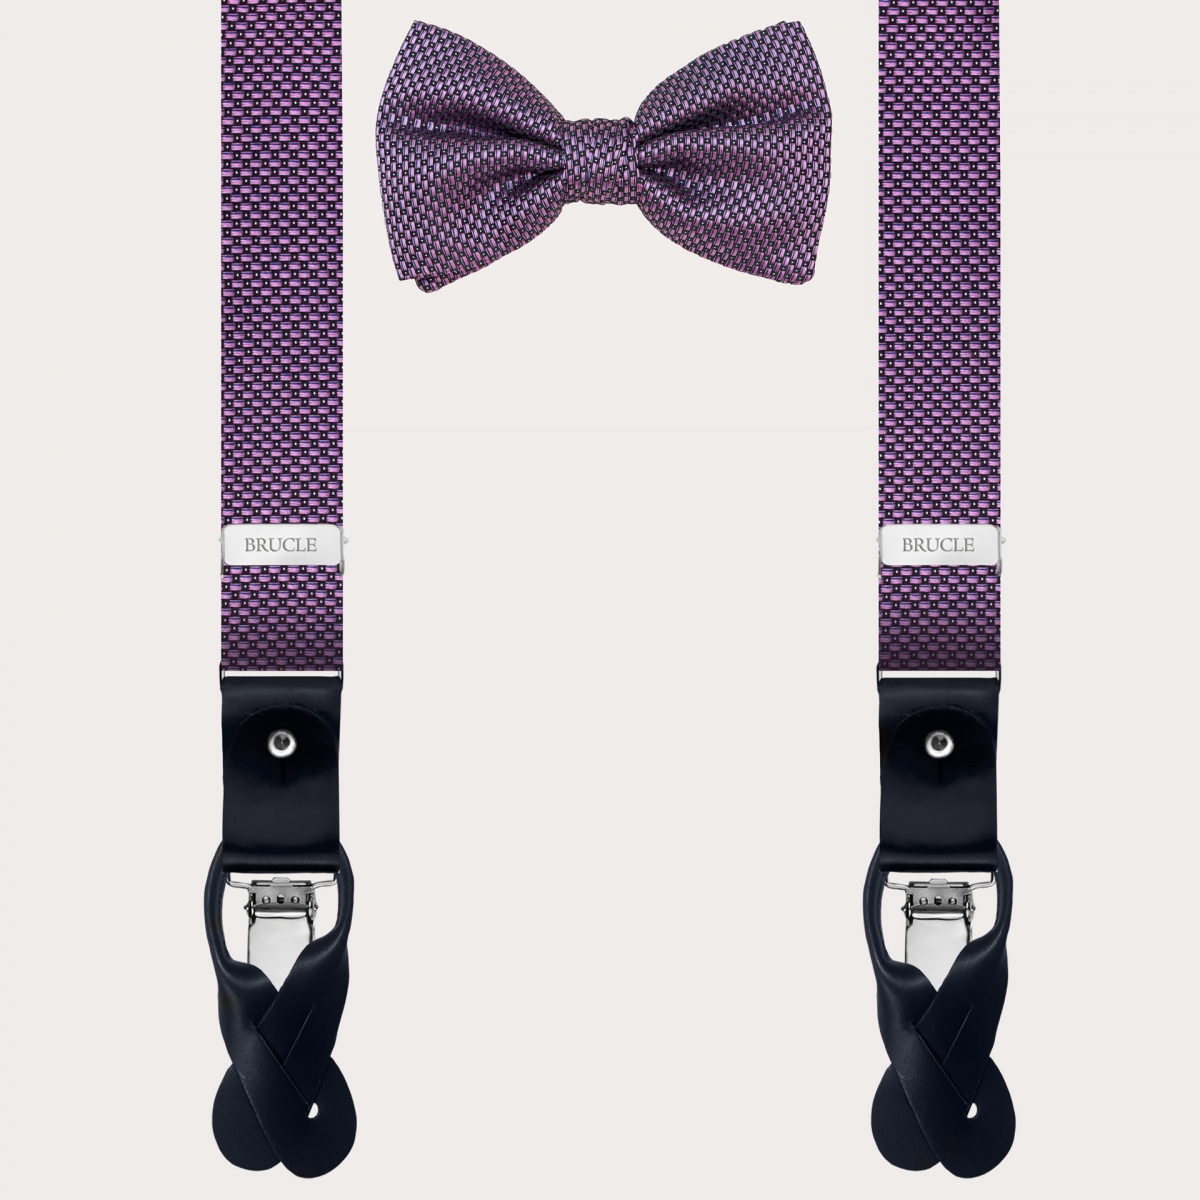 BRUCLE Thin suspenders and bow tie, coordinated in pink dotted silk